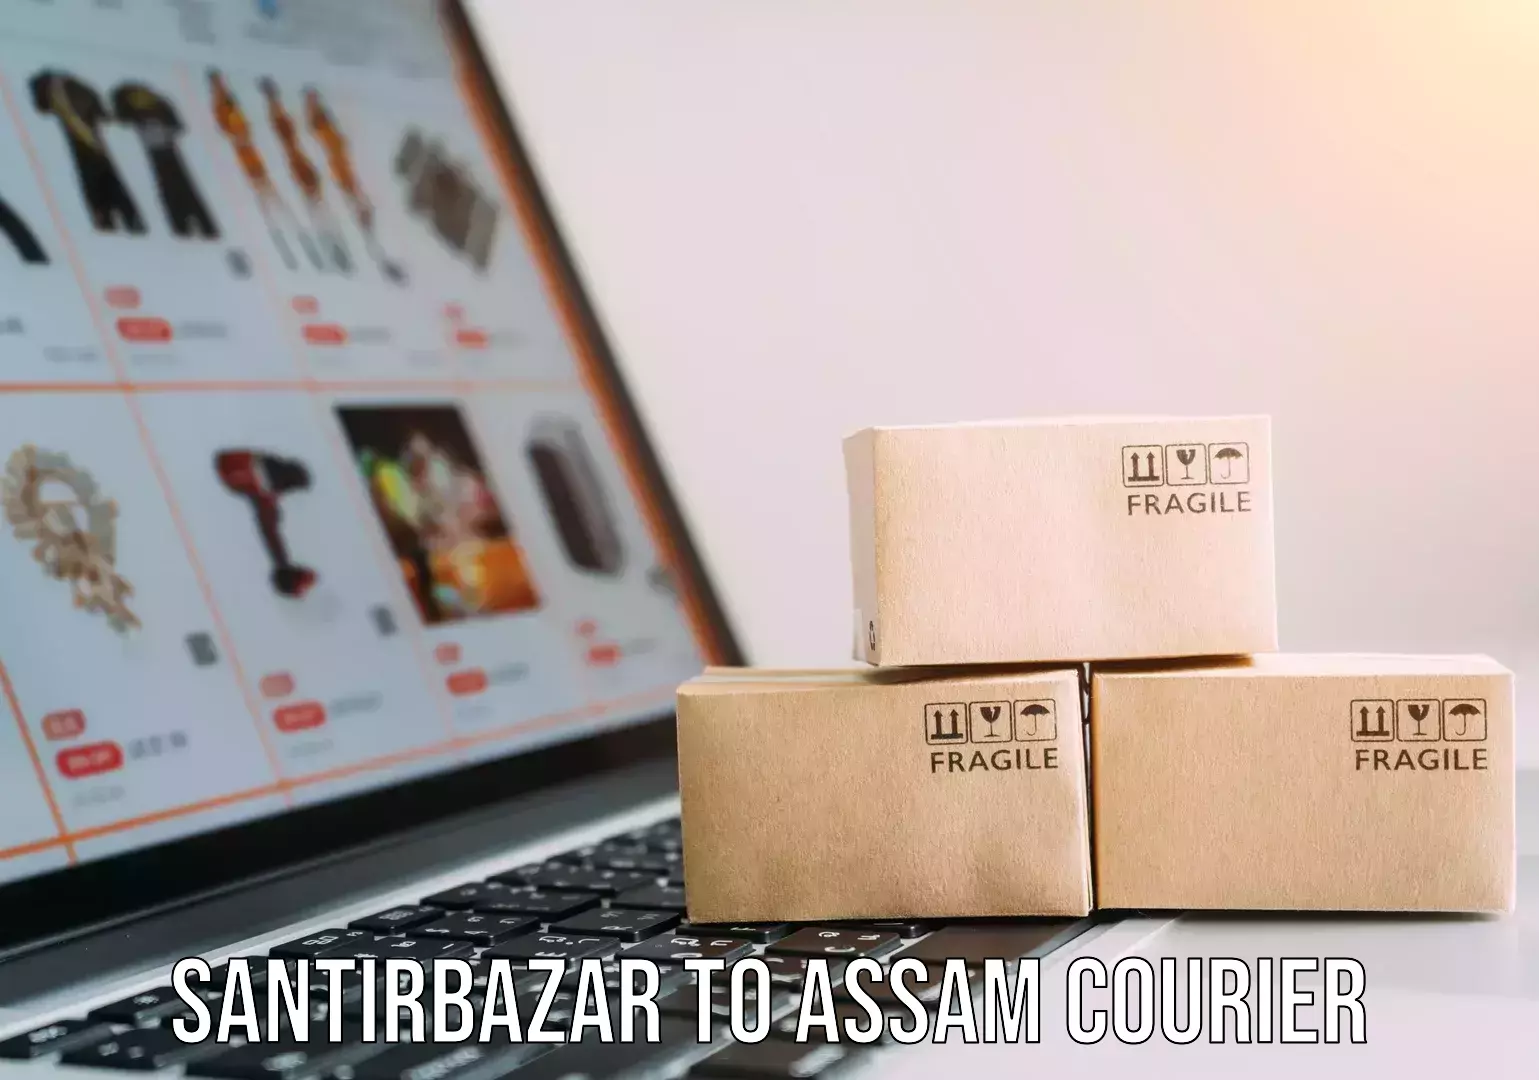 Next-day delivery options Santirbazar to Assam